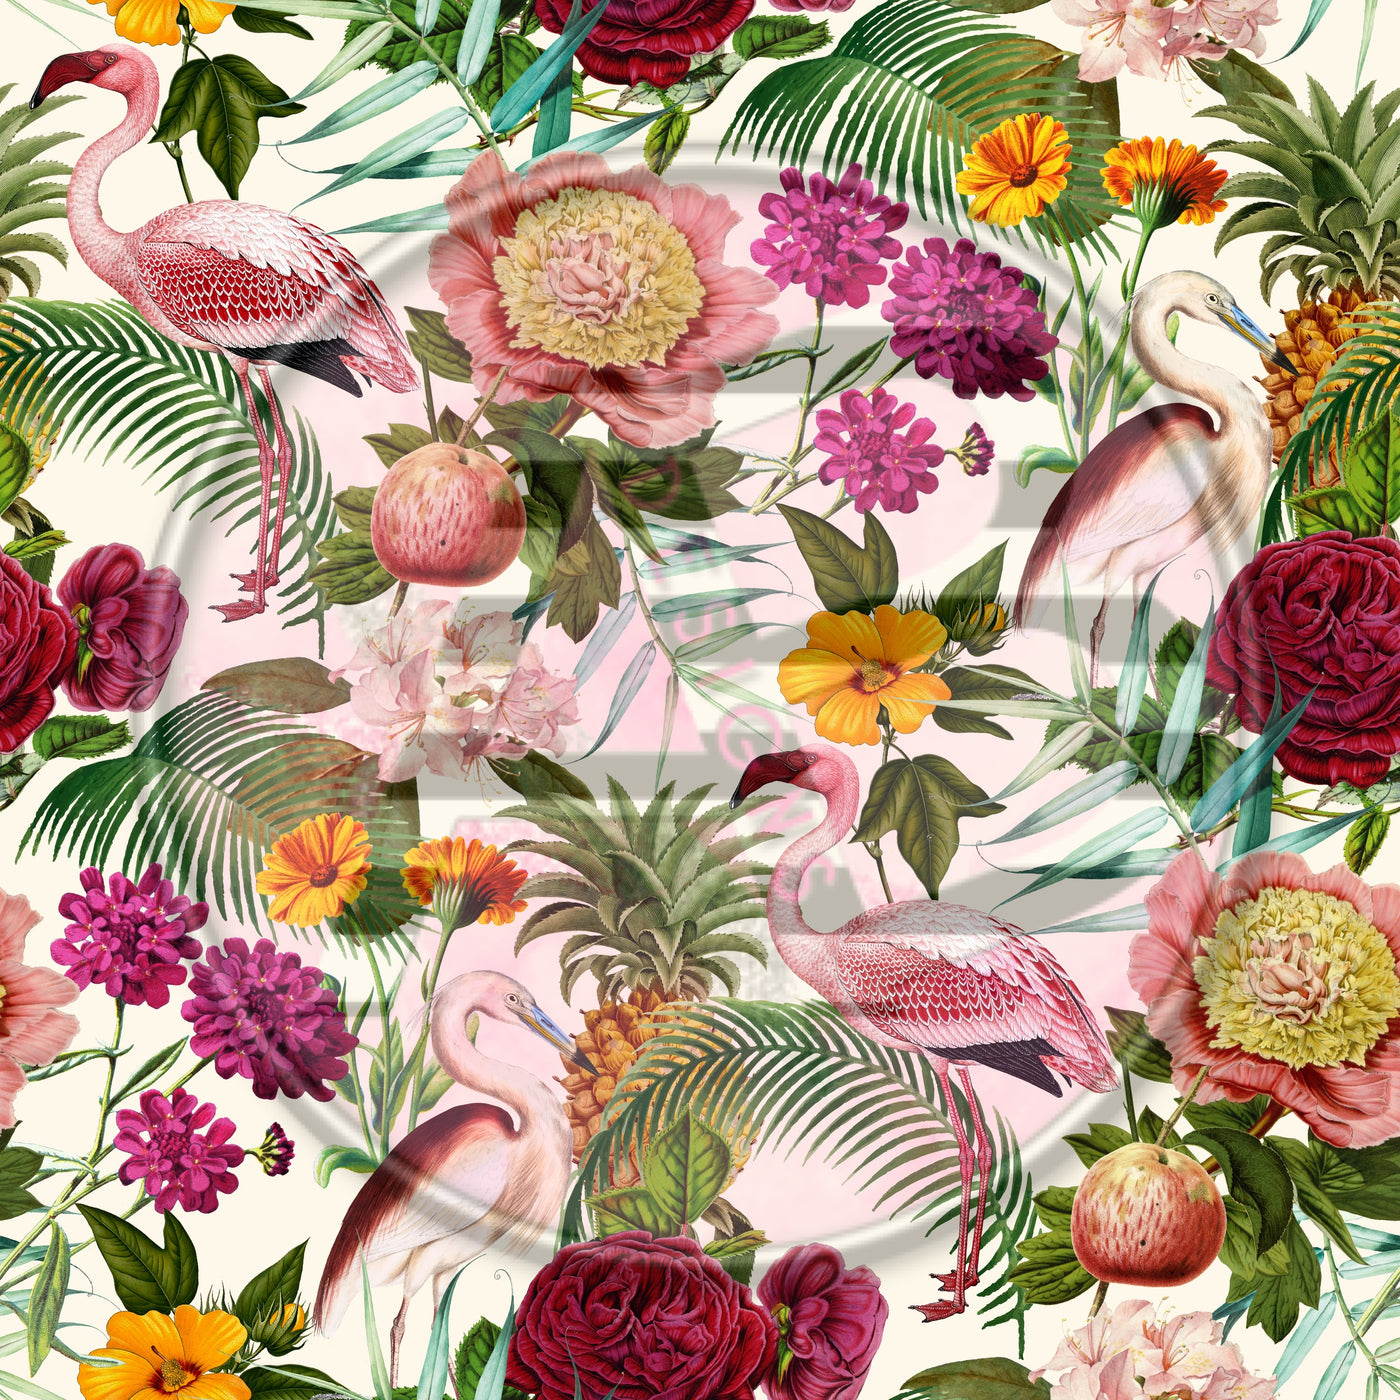 Adhesive Patterned Vinyl - Tropical 1761